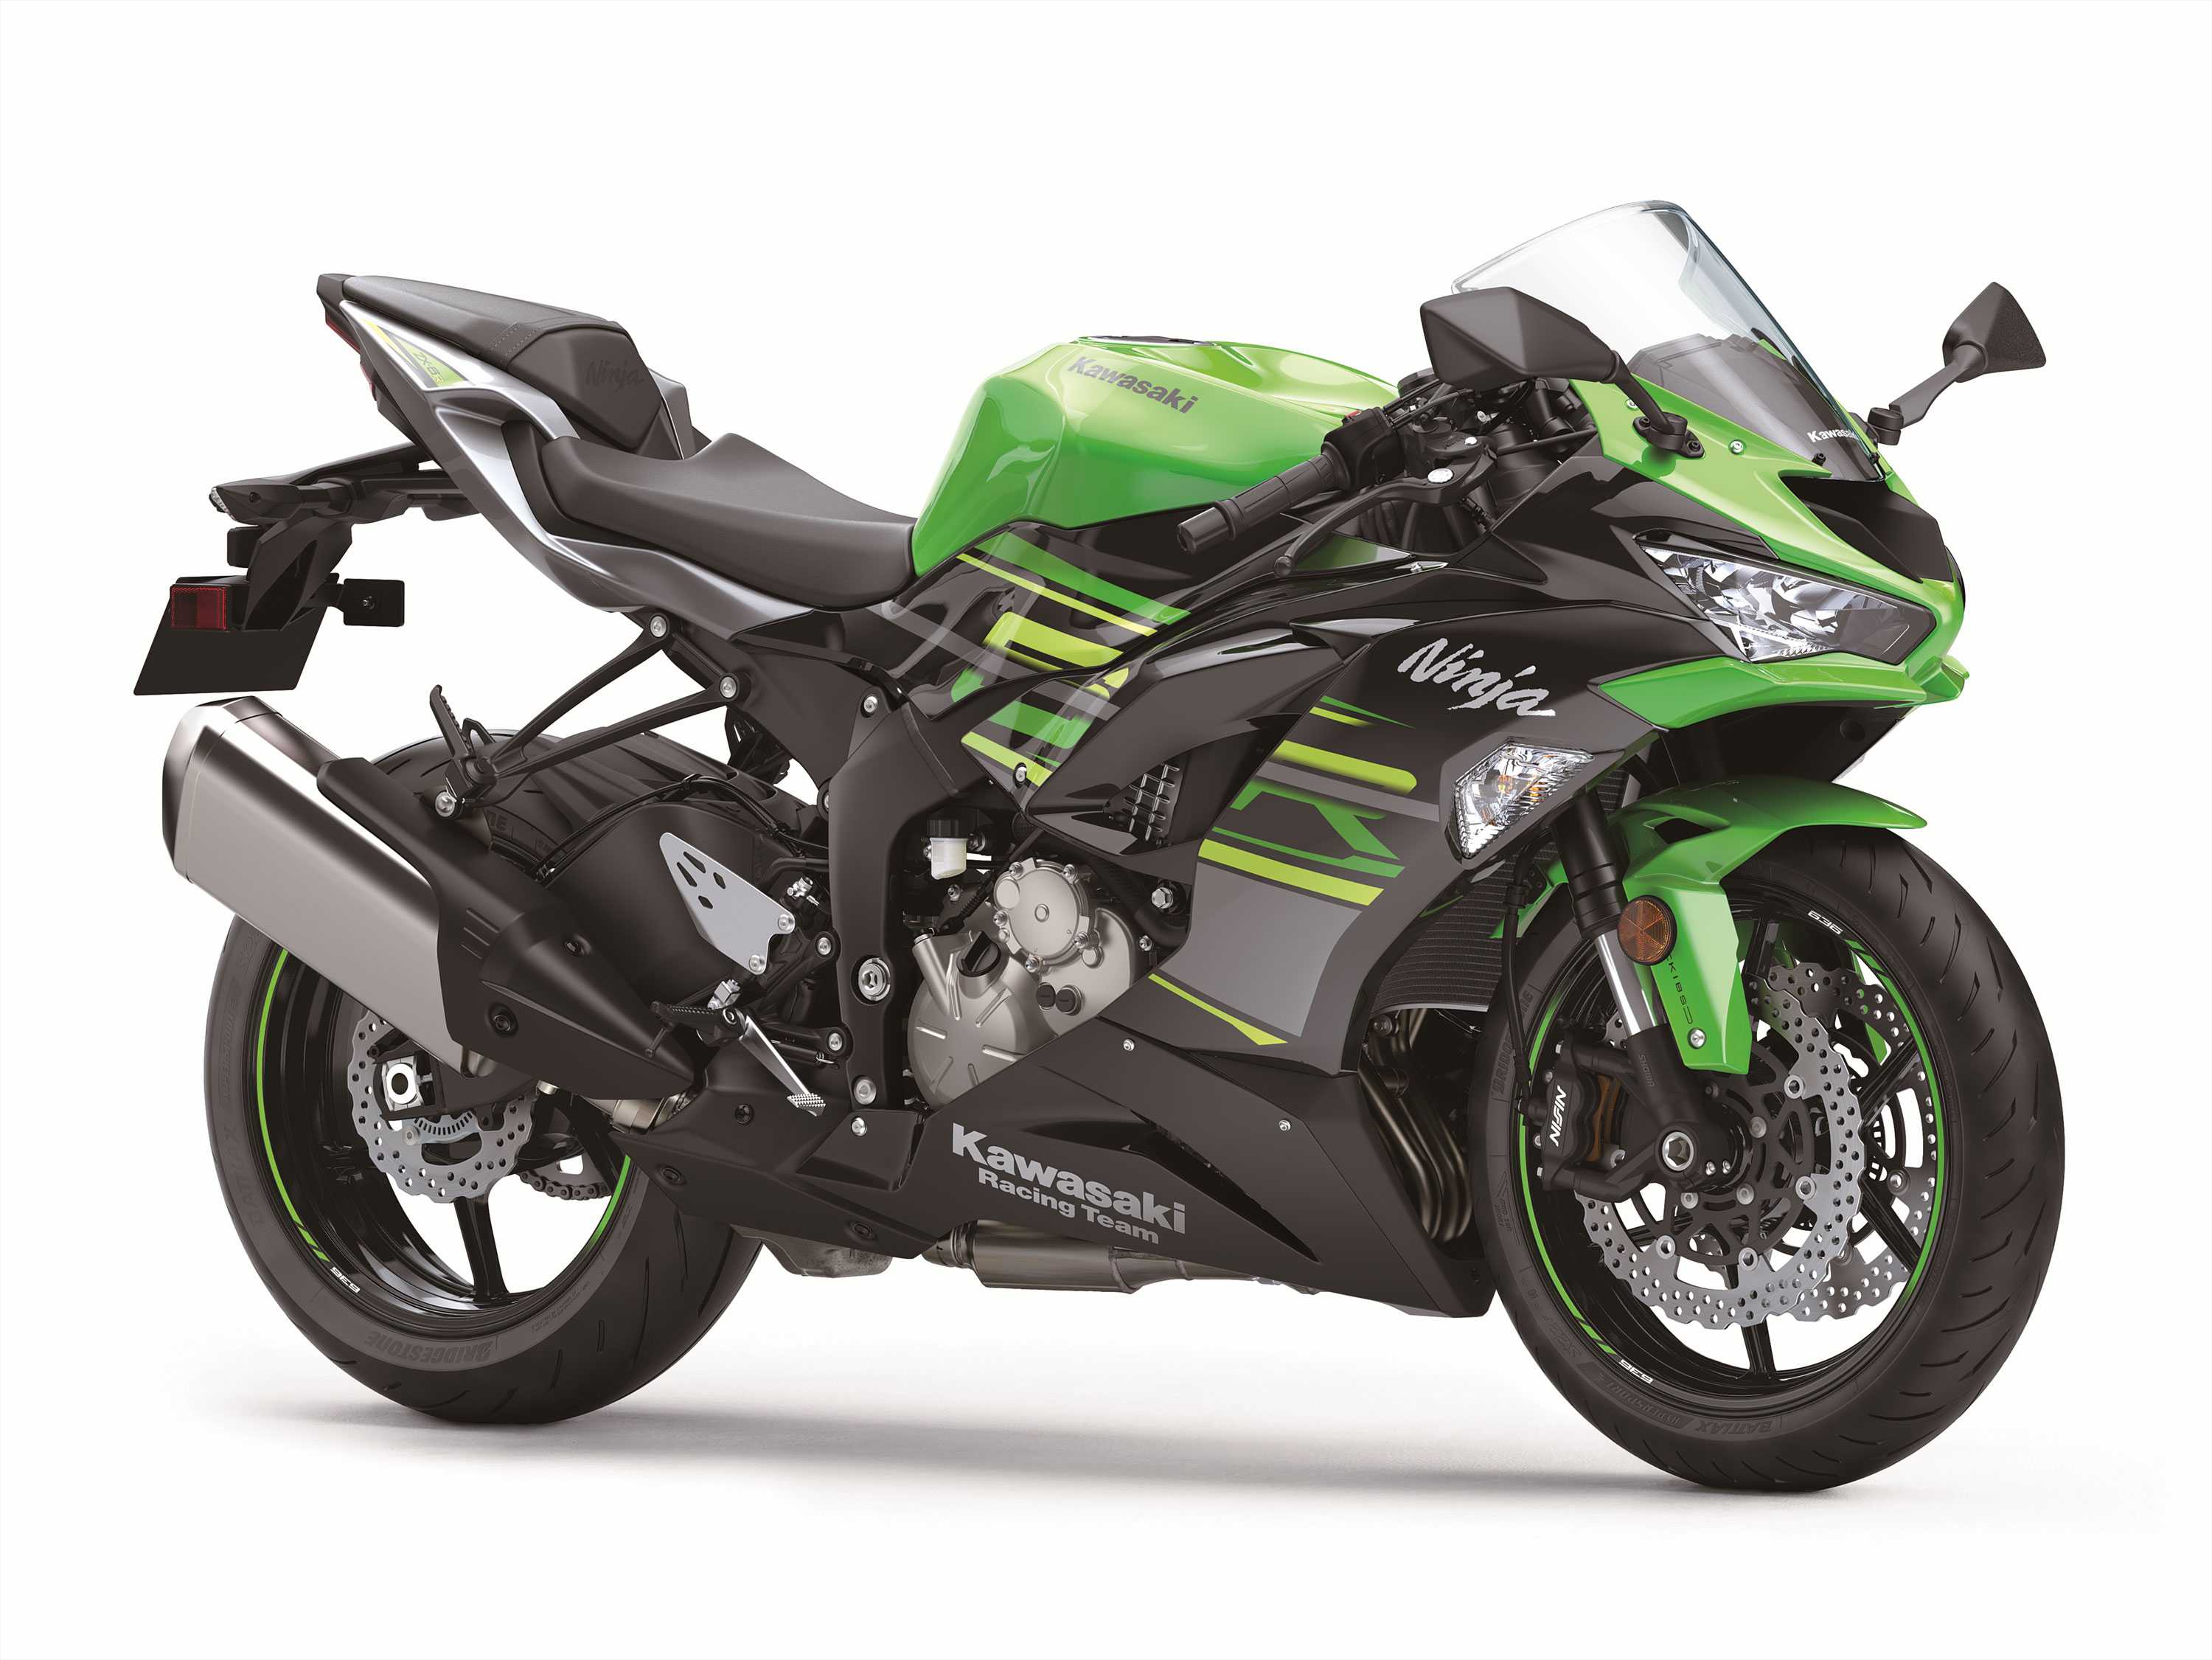 Kawasaki Introduces New 2019 ZX-6R With 